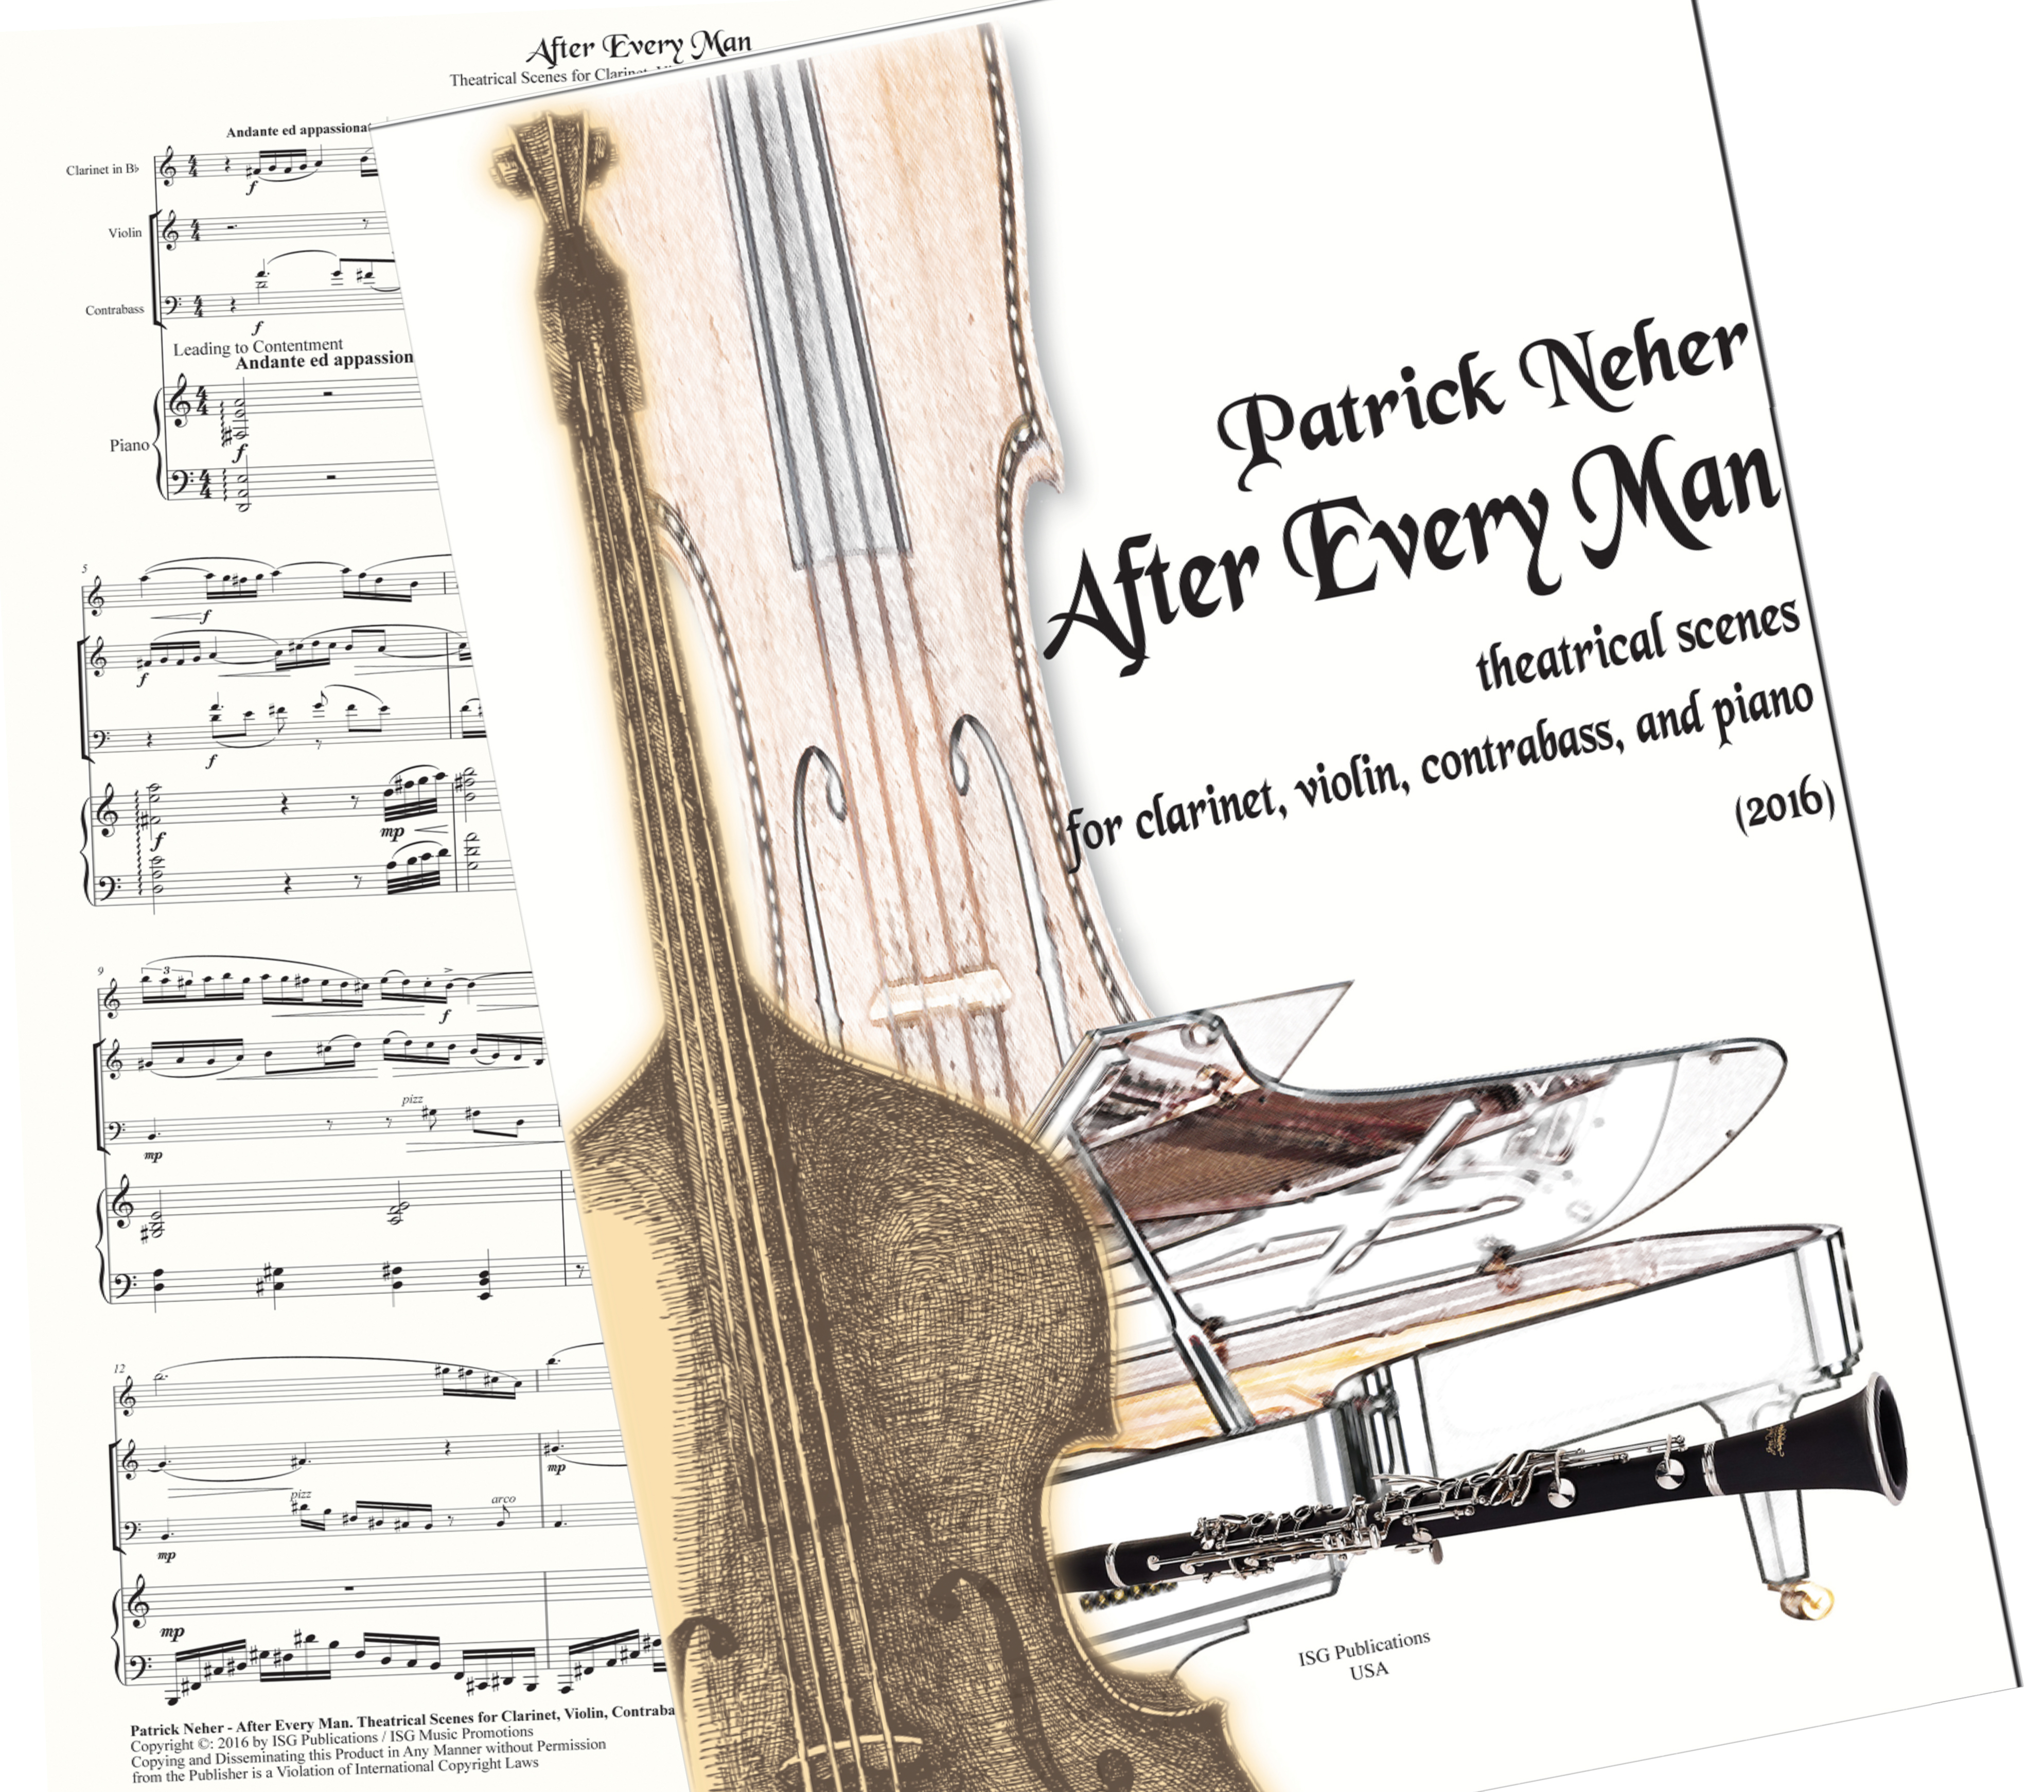 Patrick Neher - After Every Man for Clarinet, Violin, Double Bass and Piano